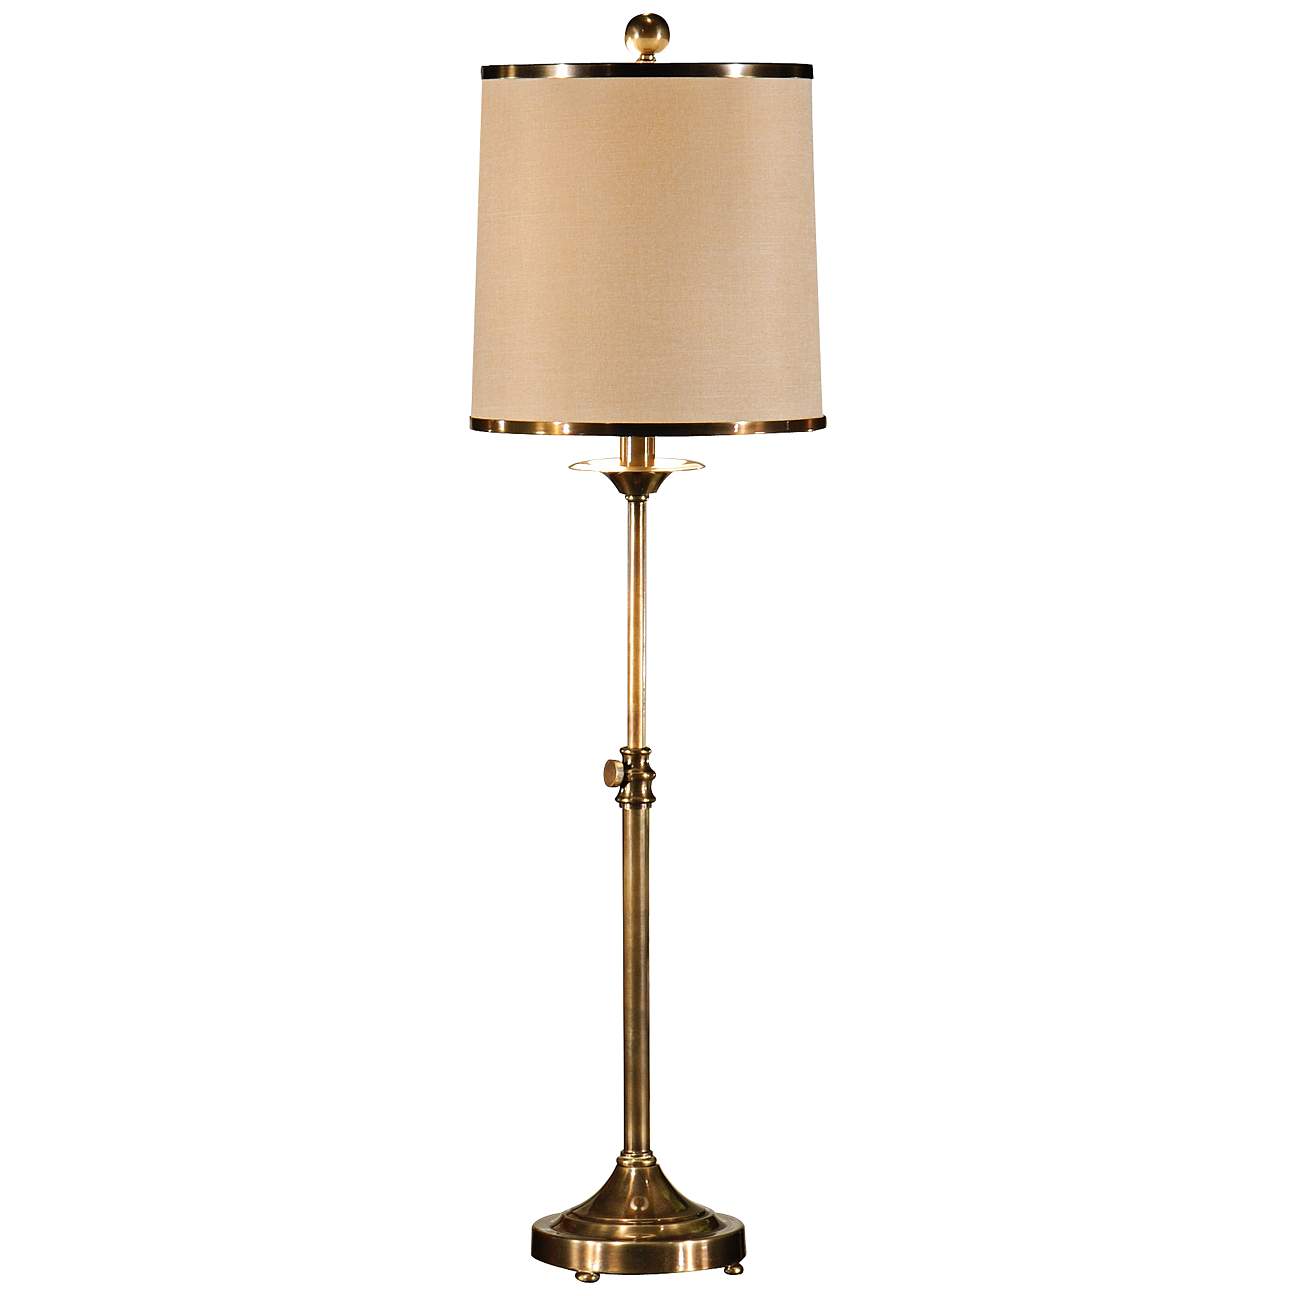 Wildwood Adjustable Iron and Brass Table Lamp - #2F465 | Lamps Plus